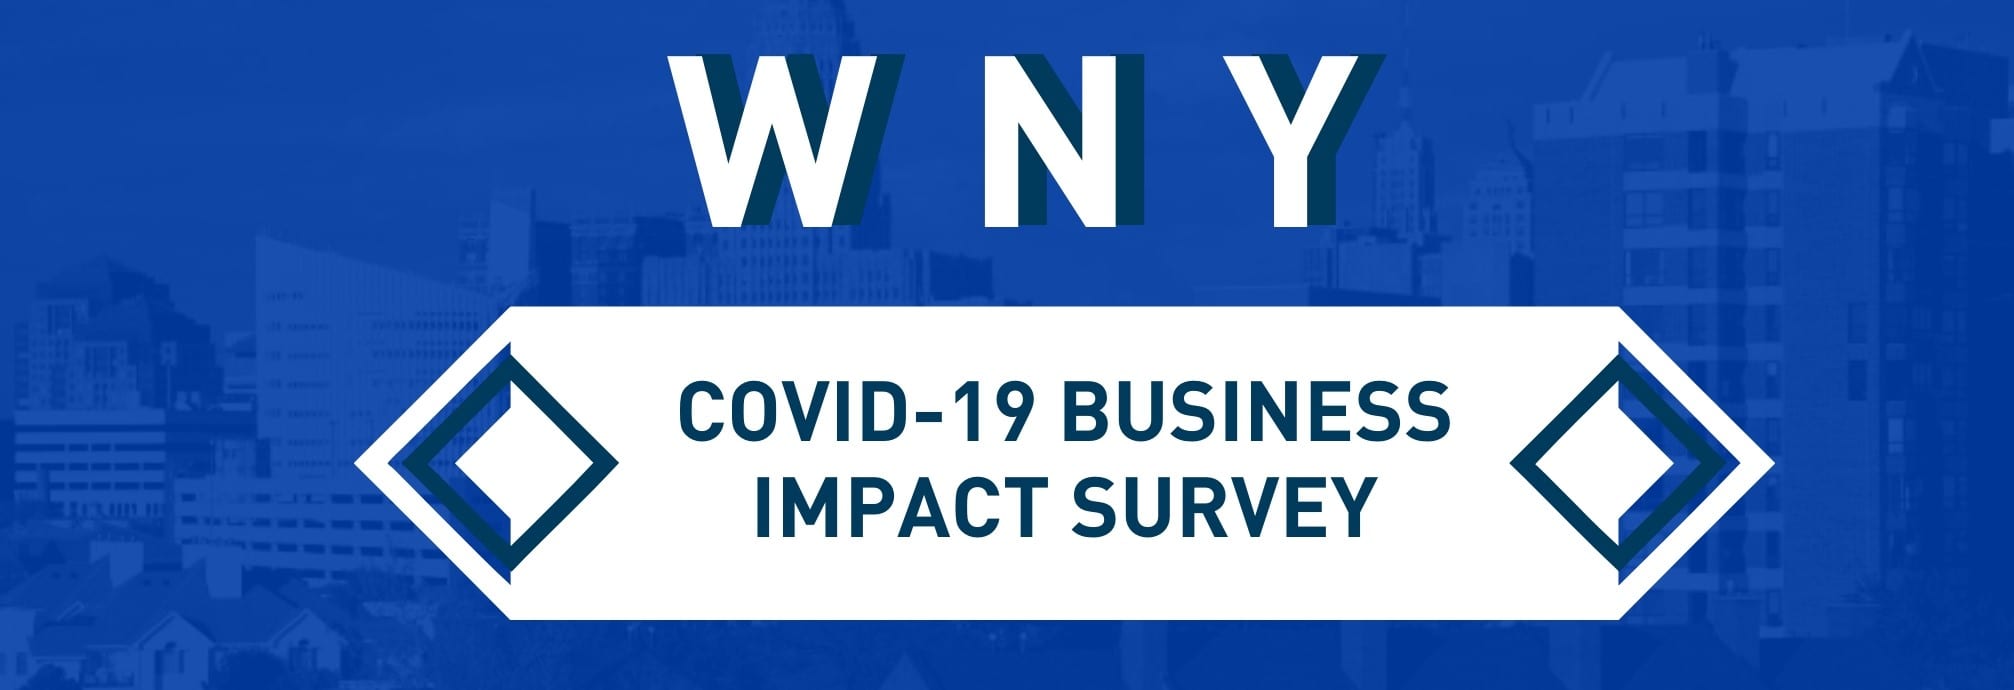 Private & Public Sectors Launch Survey to Determine COVID-19 Impact on WNY Business